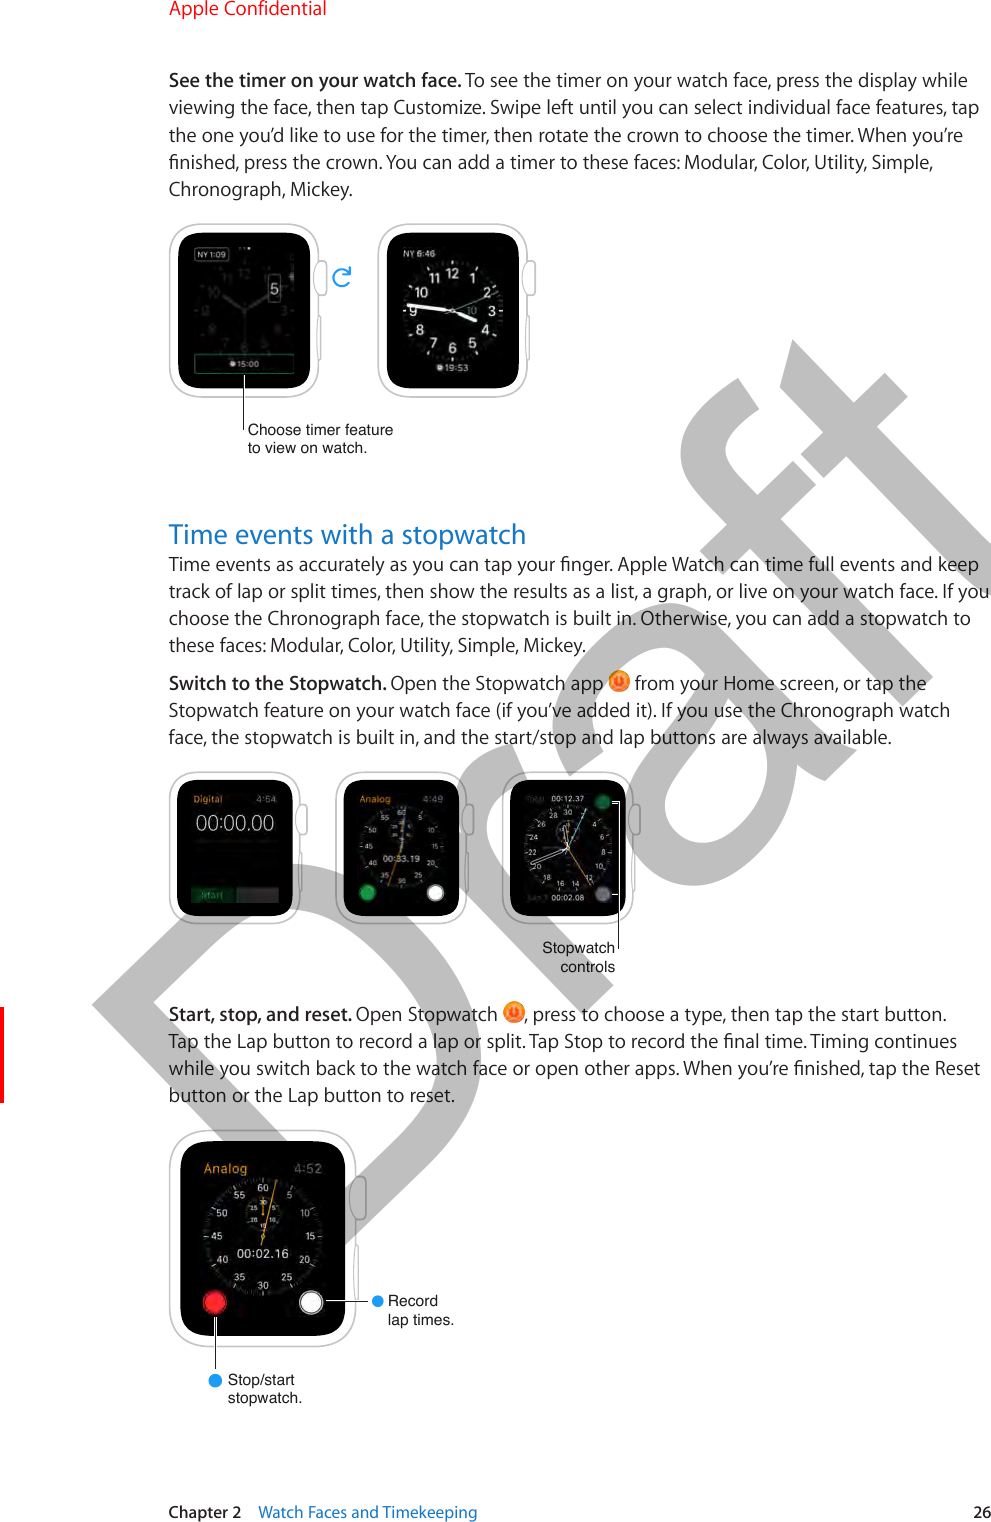 Chapter 2    Watch Faces and Timekeeping  26See the timer on your watch face. To see the timer on your watch face, press the display while viewing the face, then tap Customize. Swipe left until you can select individual face features, tap the one you’d like to use for the timer, then rotate the crown to choose the timer. When you’re nished, press the crown. You can add a timer to these faces: Modular, Color, Utility, Simple, Chronograph, Mickey.Choose timer featureto view on watch.Time events with a stopwatchTime events as accurately as you can tap your nger. Apple Watch can time full events and keep track of lap or split times, then show the results as a list, a graph, or live on your watch face. If you choose the Chronograph face, the stopwatch is built in. Otherwise, you can add a stopwatch to these faces: Modular, Color, Utility, Simple, Mickey.Switch to the Stopwatch. Open the Stopwatch app   from your Home screen, or tap the Stopwatch feature on your watch face (if you’ve added it). If you use the Chronograph watch face, the stopwatch is built in, and the start/stop and lap buttons are always available.StopwatchcontrolsStart, stop, and reset. Open Stopwatch  , press to choose a type, then tap the start button. Tap the Lap button to record a lap or split. Tap Stop to record the nal time. Timing continues while you switch back to the watch face or open other apps. When you’re nished, tap the Reset button or the Lap button to reset.Recordlap times.Stop/startstopwatch.Apple Confidential  100% resize factorDraft